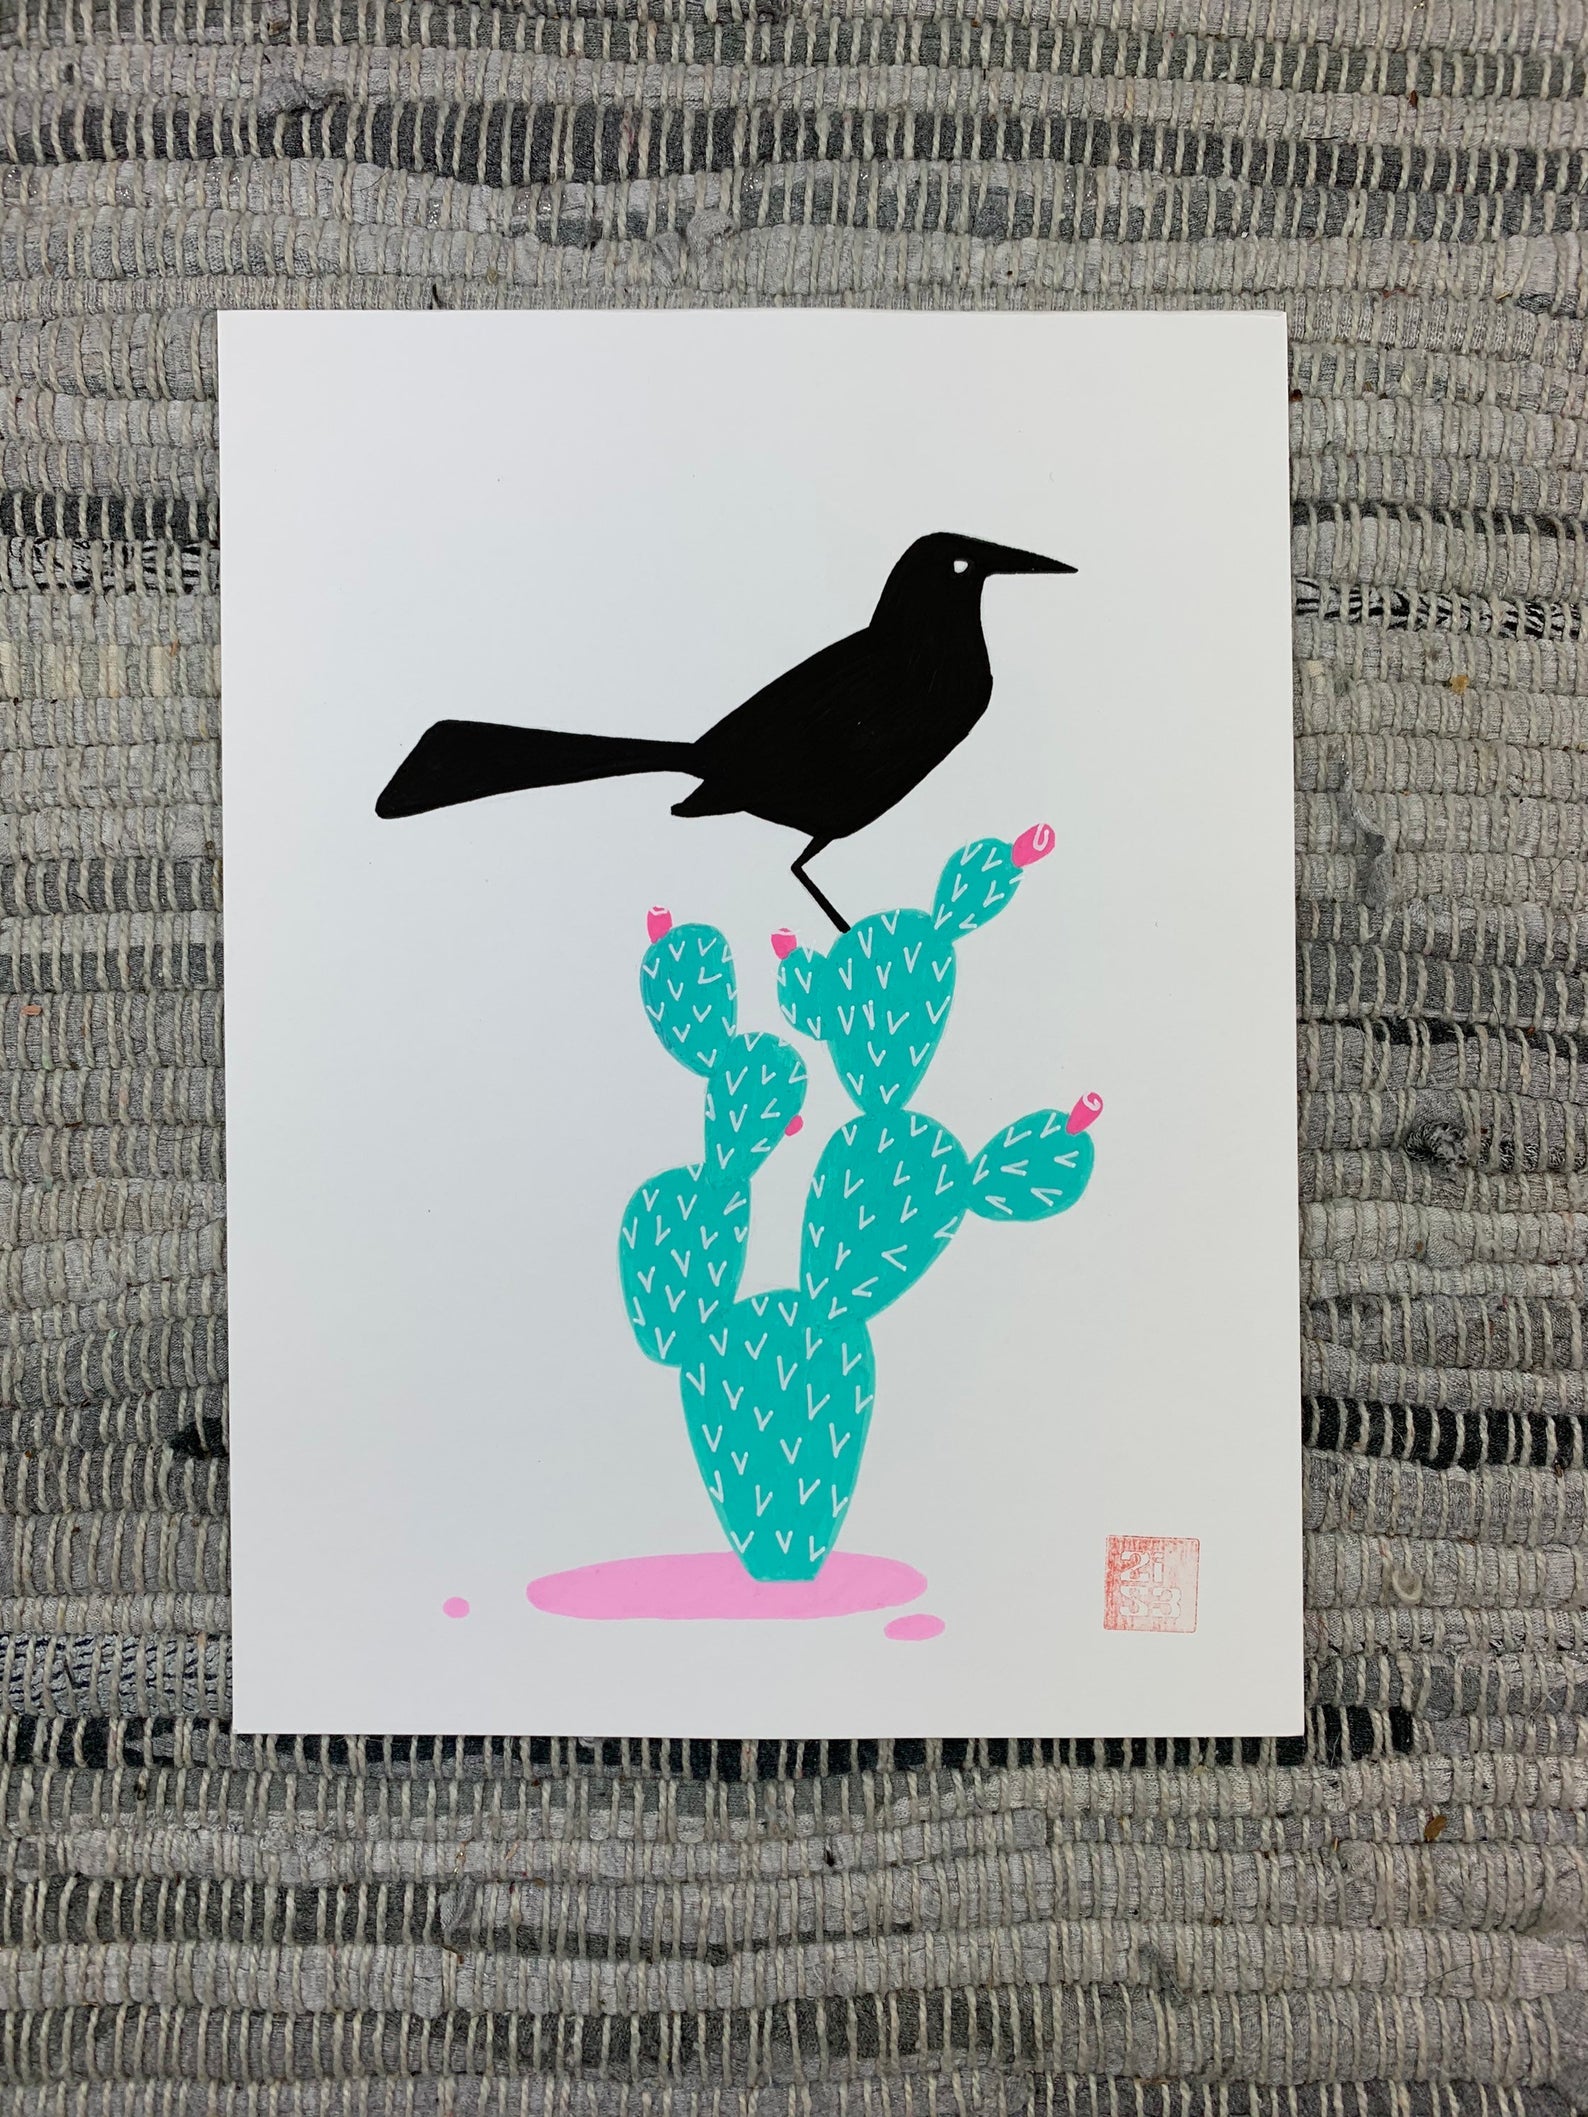 Original artwork of a black bird, boat-tailed grackle, standing on a prickly pear cactus.